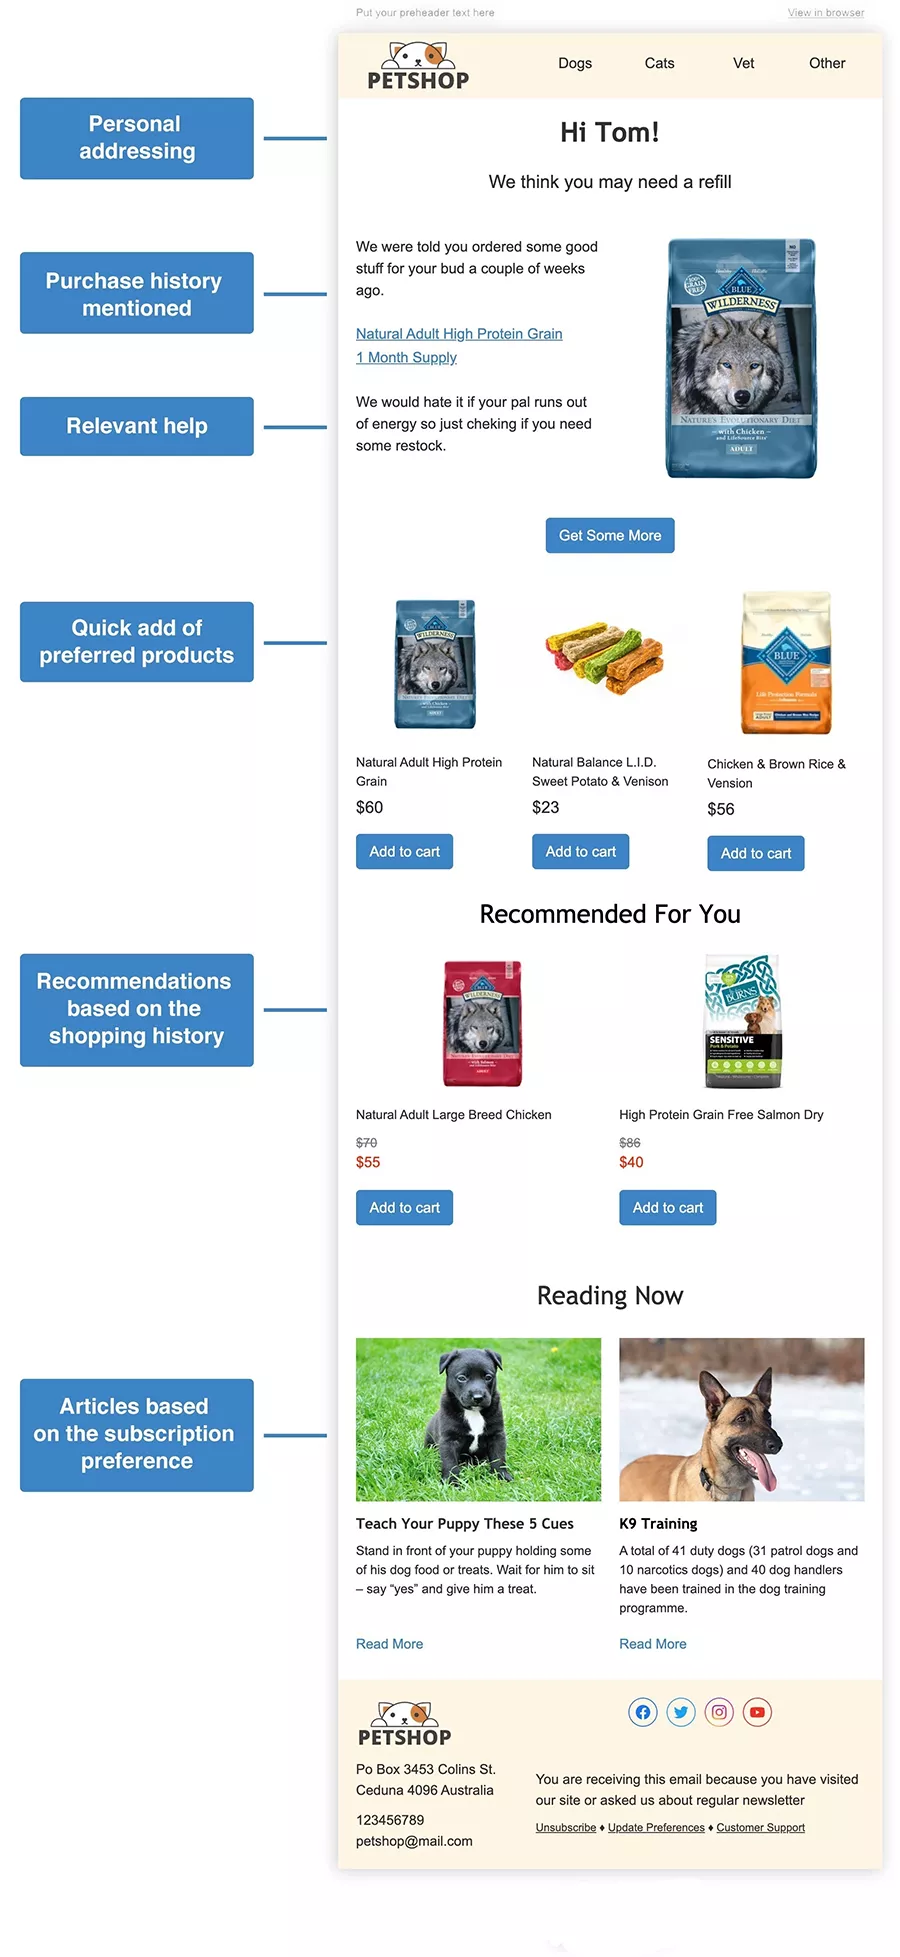 Email marketing template for 'PETSHOP' featuring personalized greeting, purchase history, product recommendations, and educational articles for pet owners, with images of dog food products and puppies.